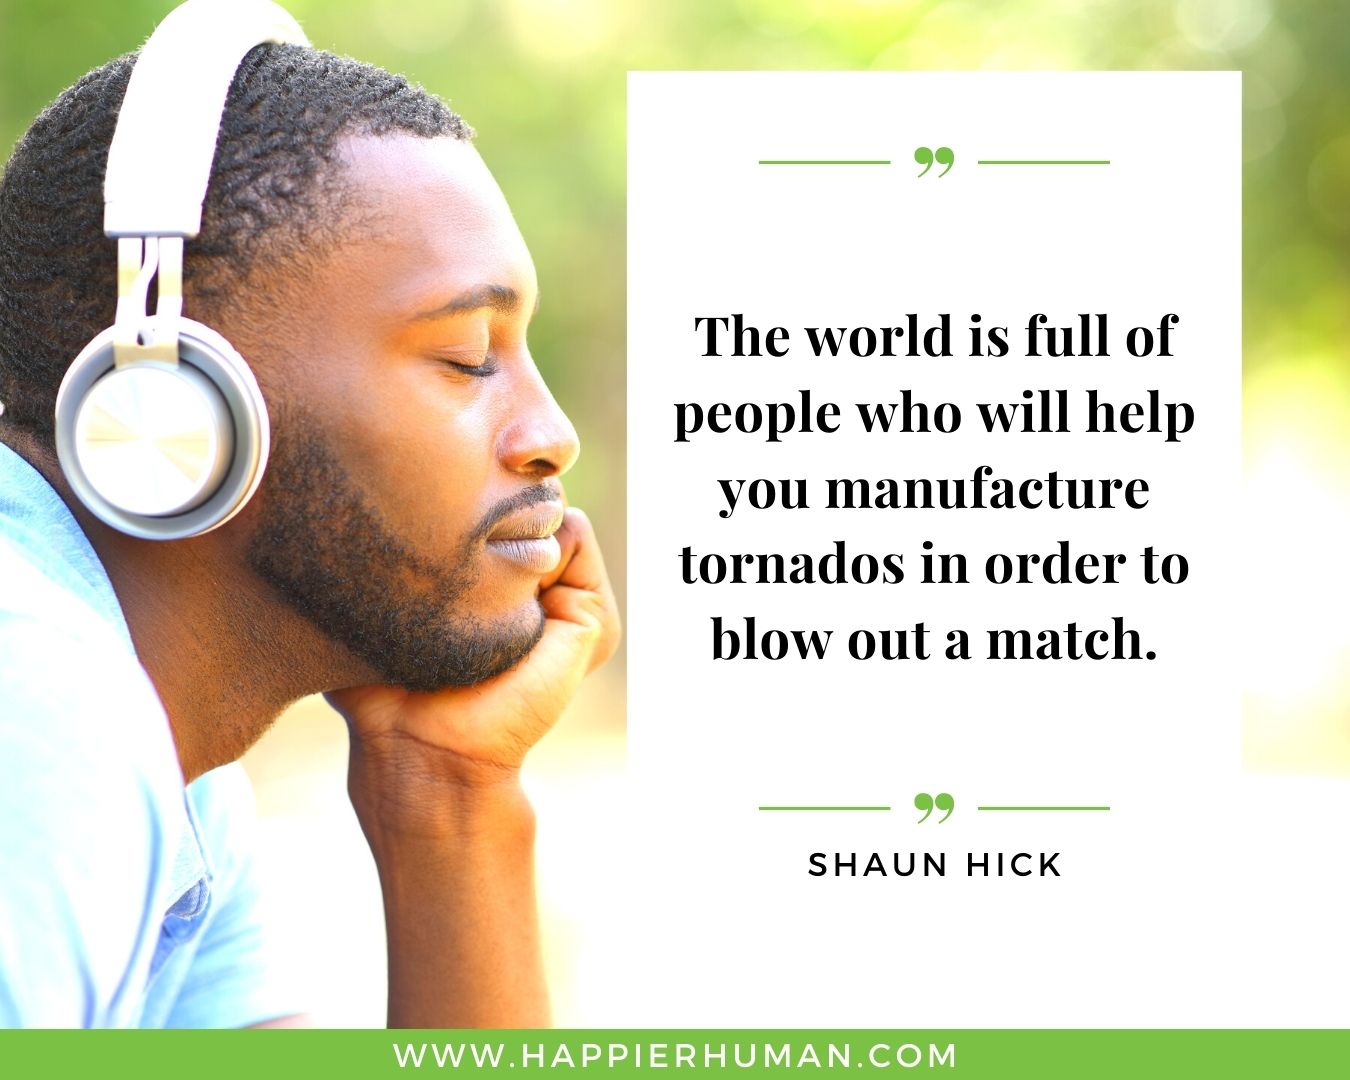 Overthinking Quotes - “The world is full of people who will help you manufacture tornados in order to blow out a match.” - Shaun Hick